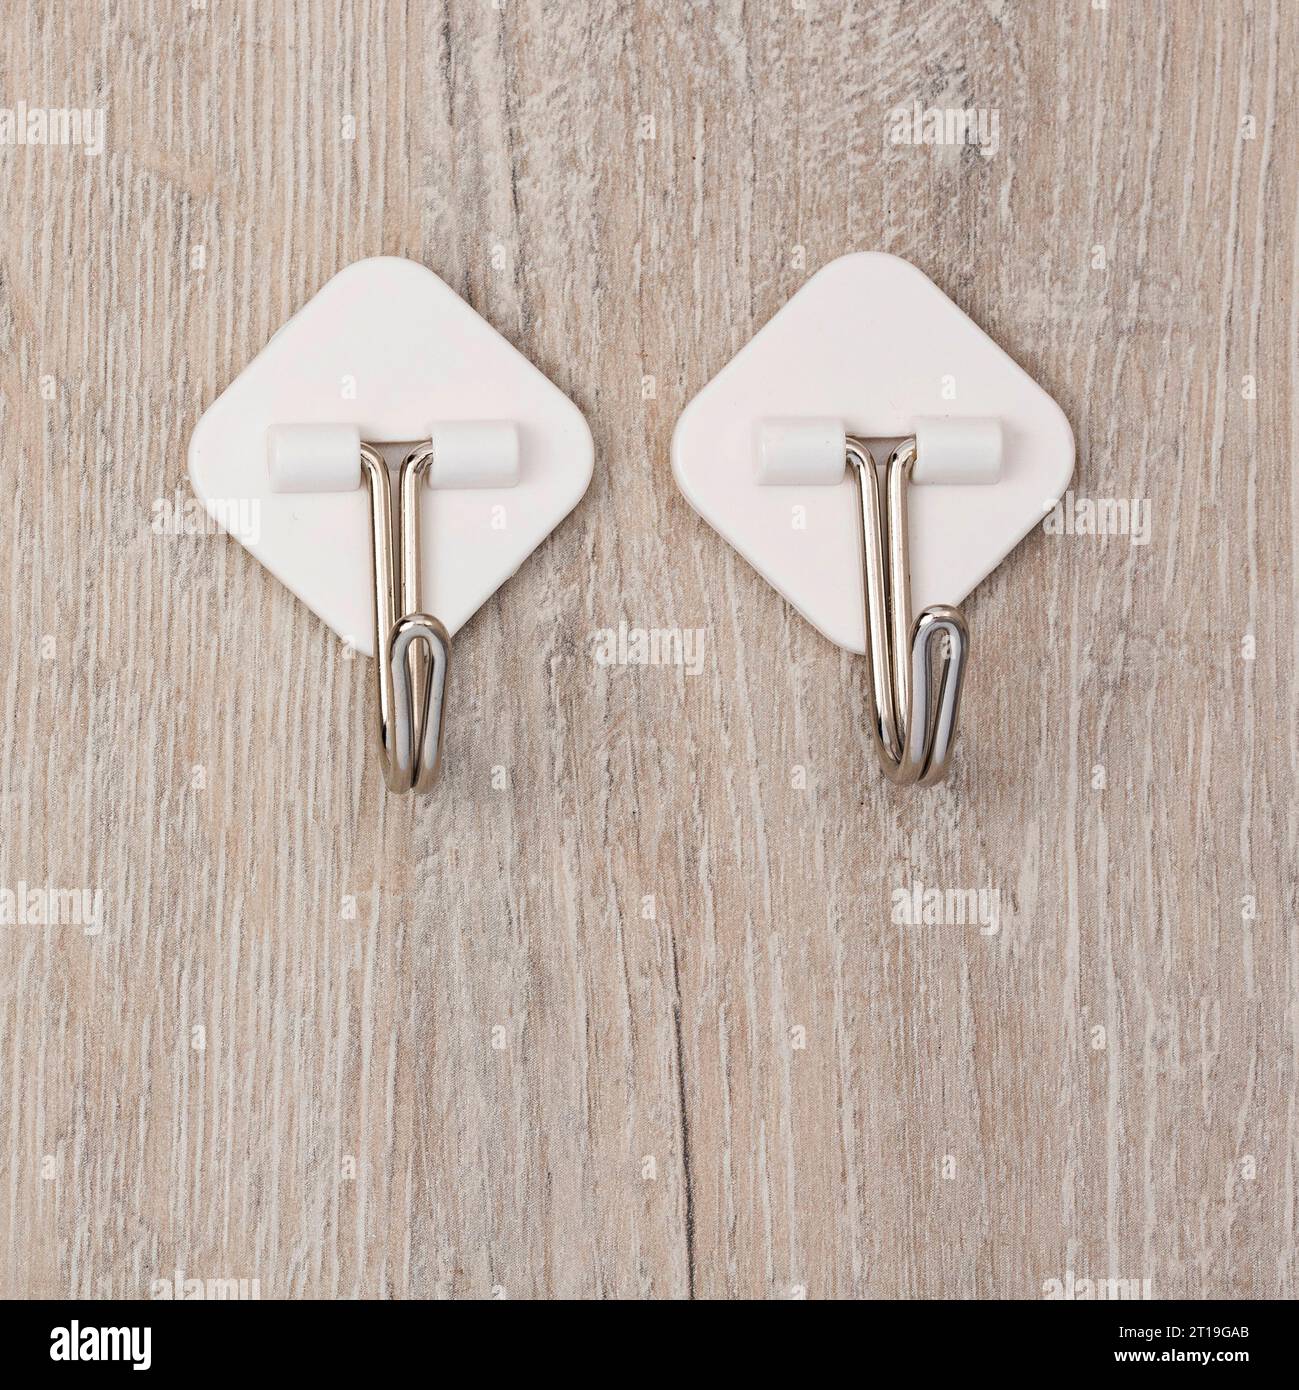 Two plastic adhesive utility wall fixed hooks with metal hooks for hanging clothes Stock Photo